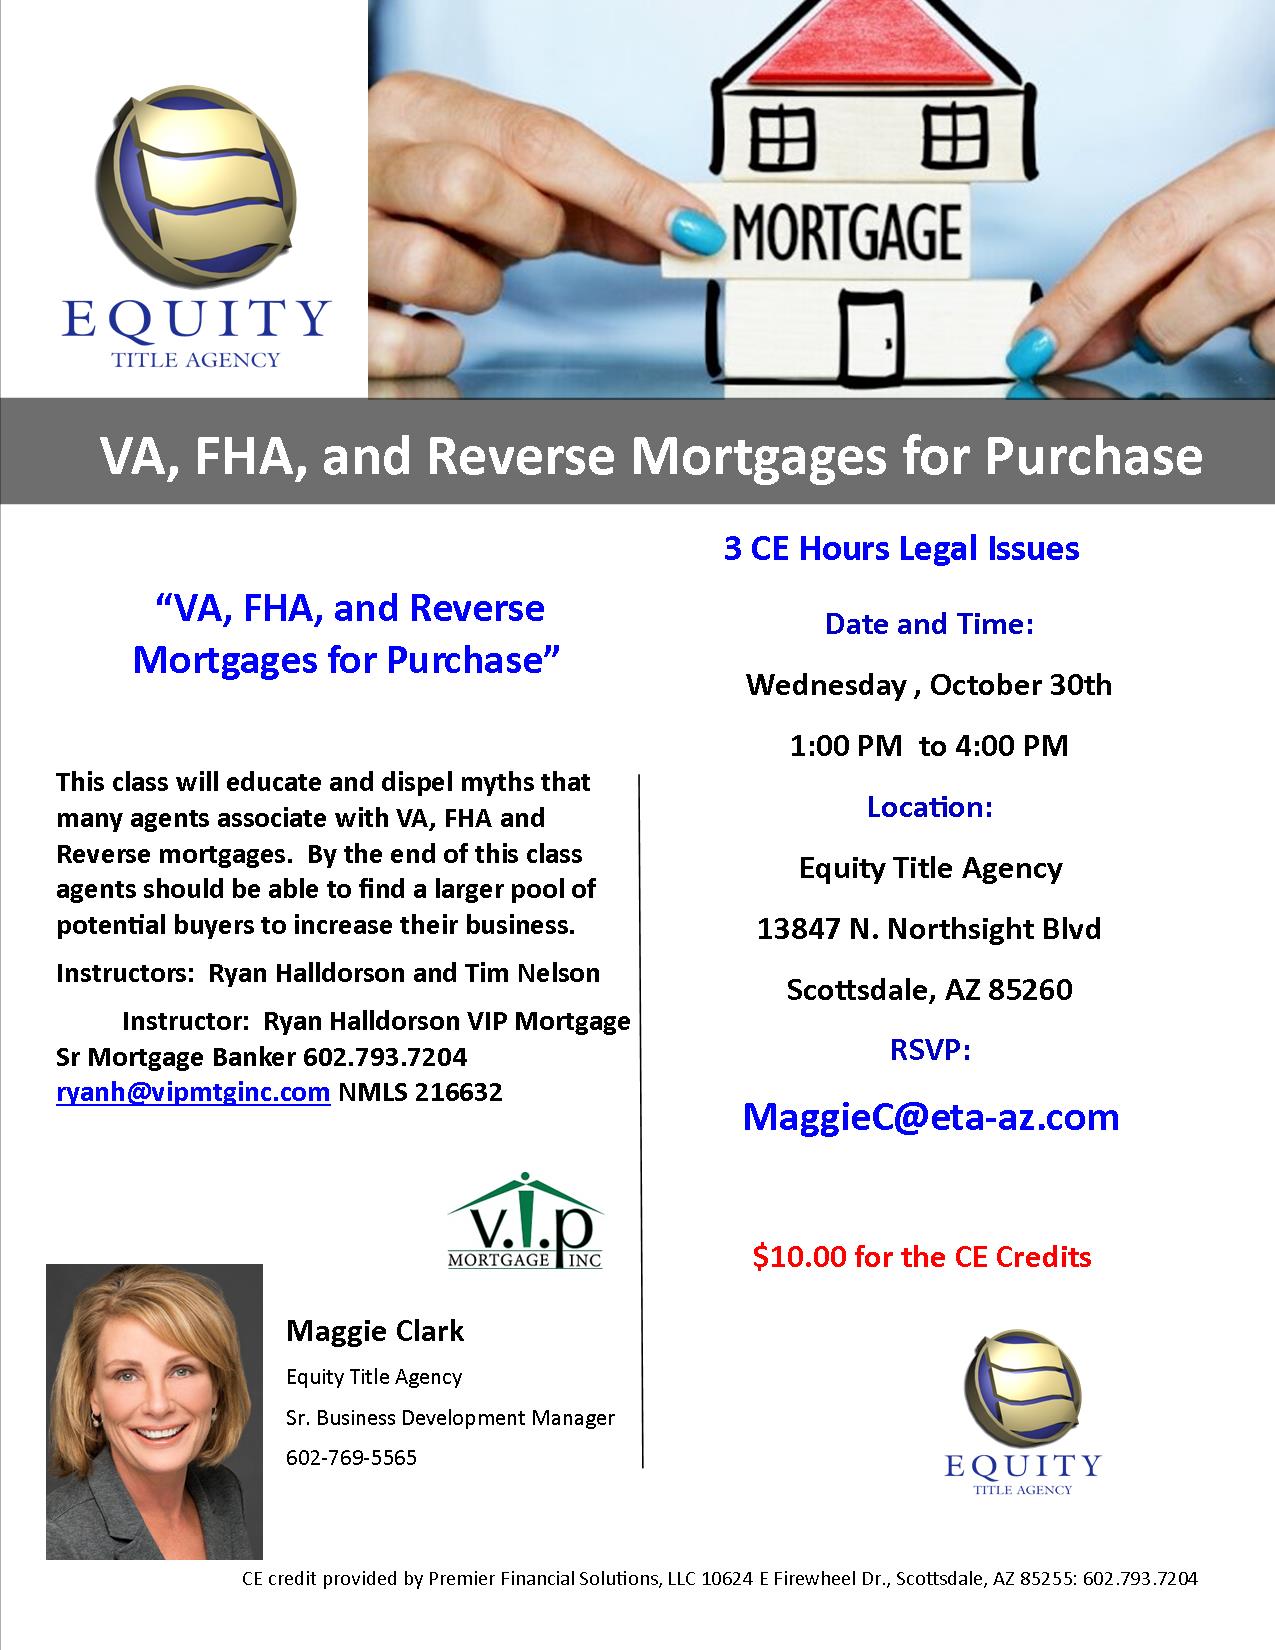 VA, FHA and Reverse Mortgages for Purchase